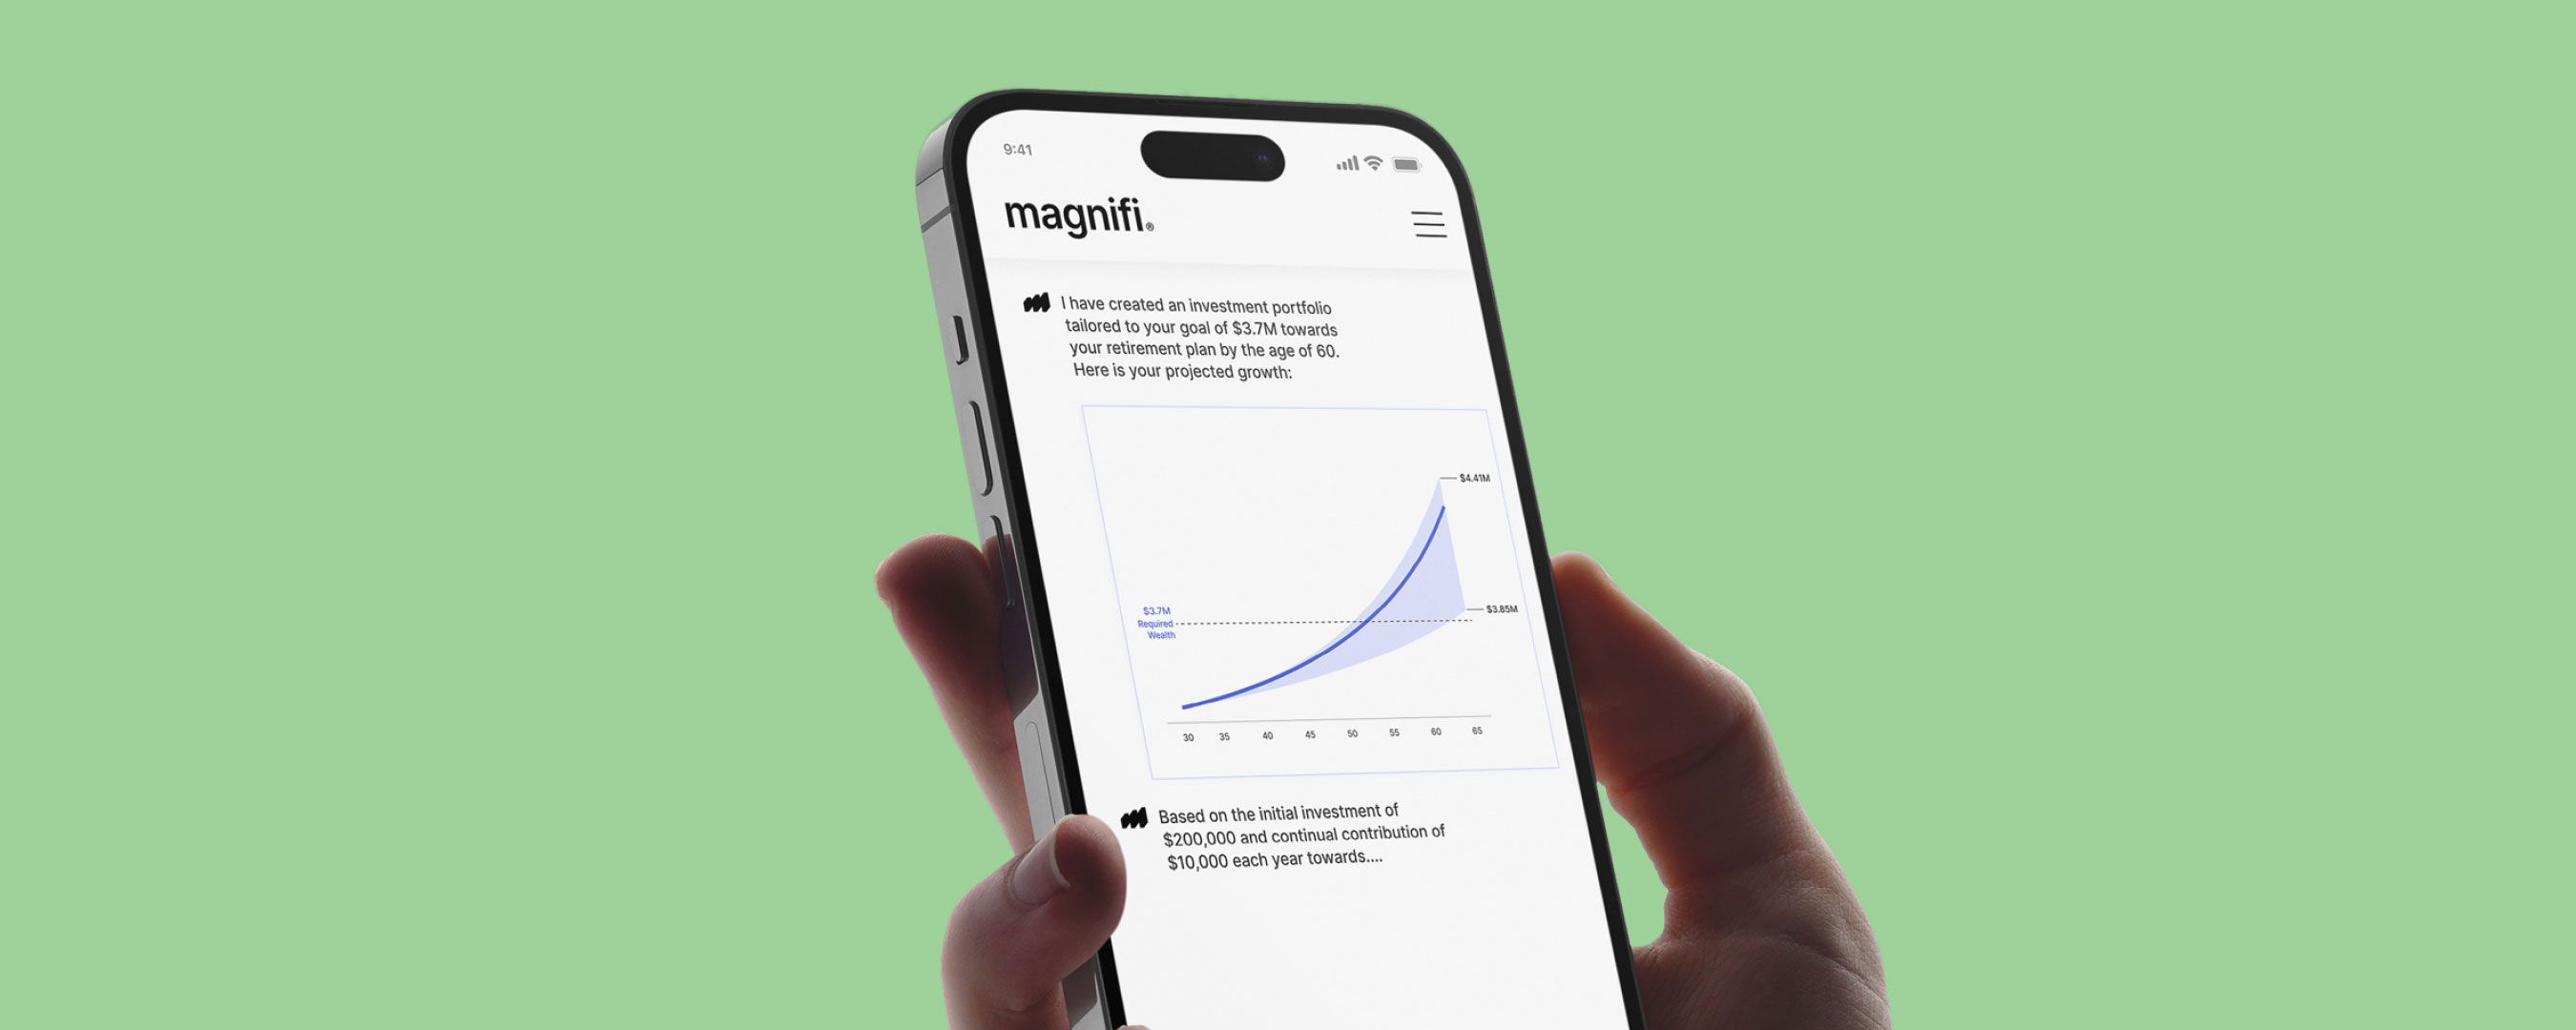 Magnifi app featuring growth of retirement account over time